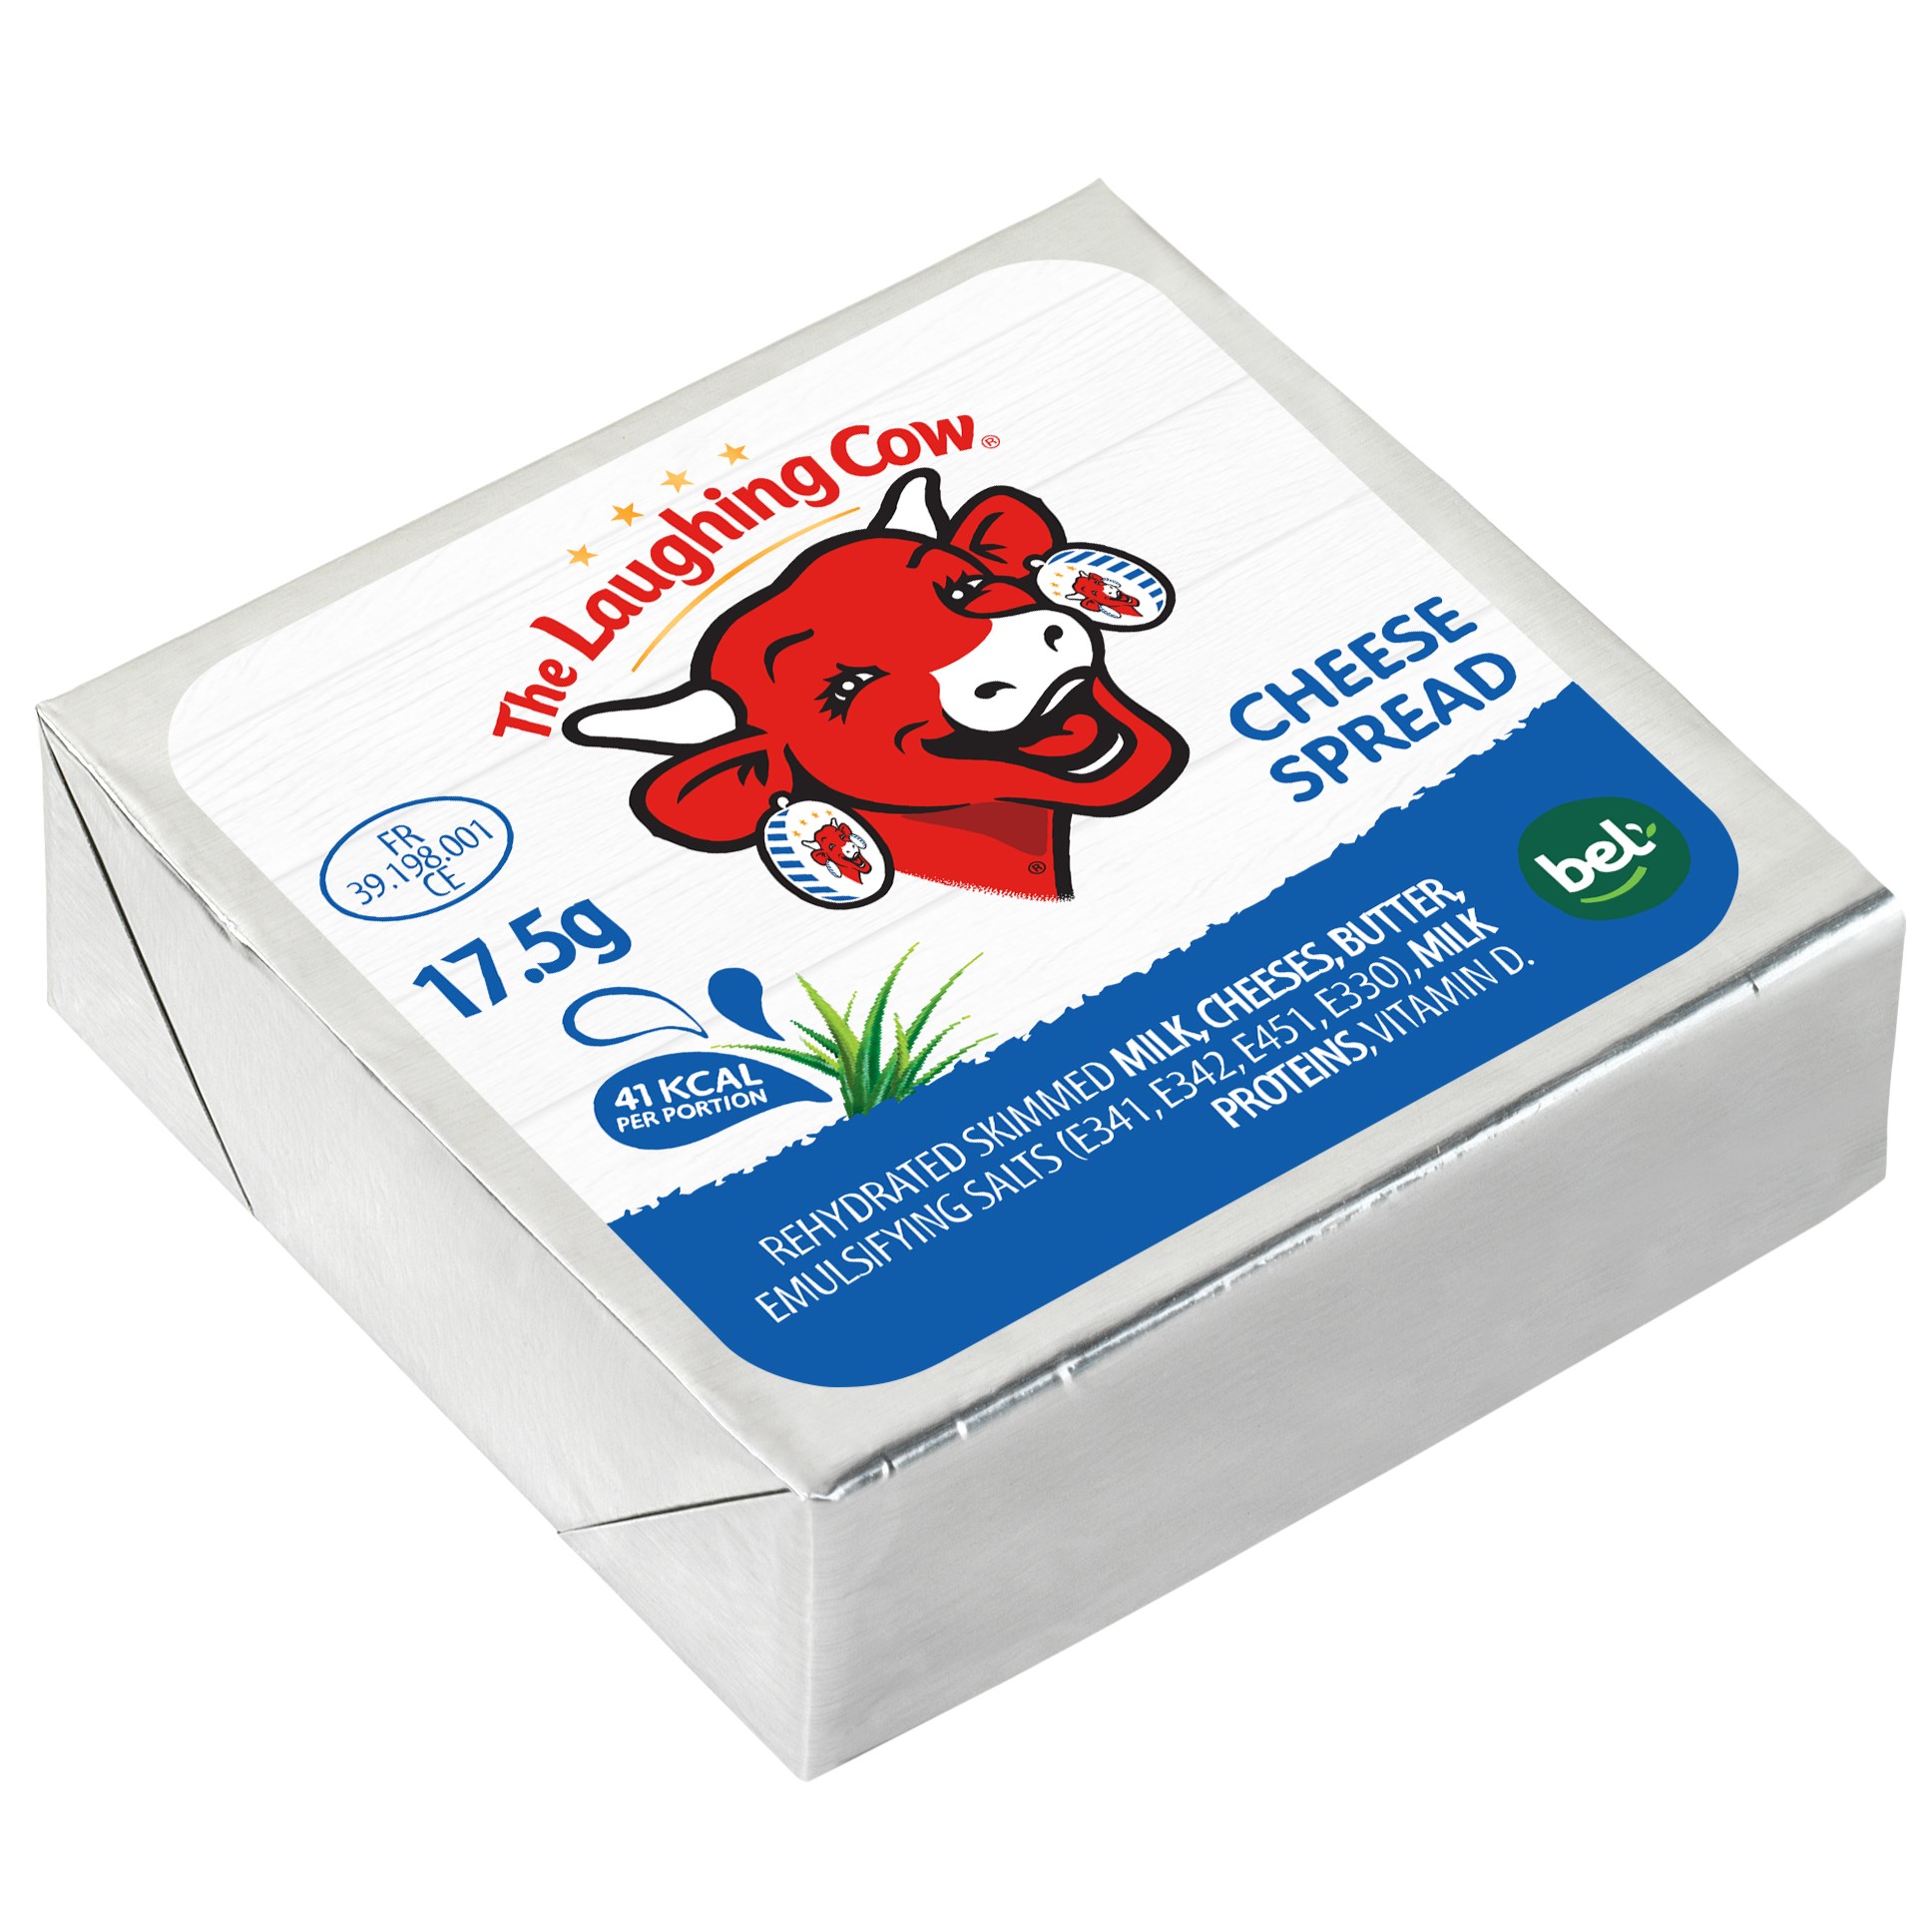 The Laughing Cow Original Cheese Spread Square Angle